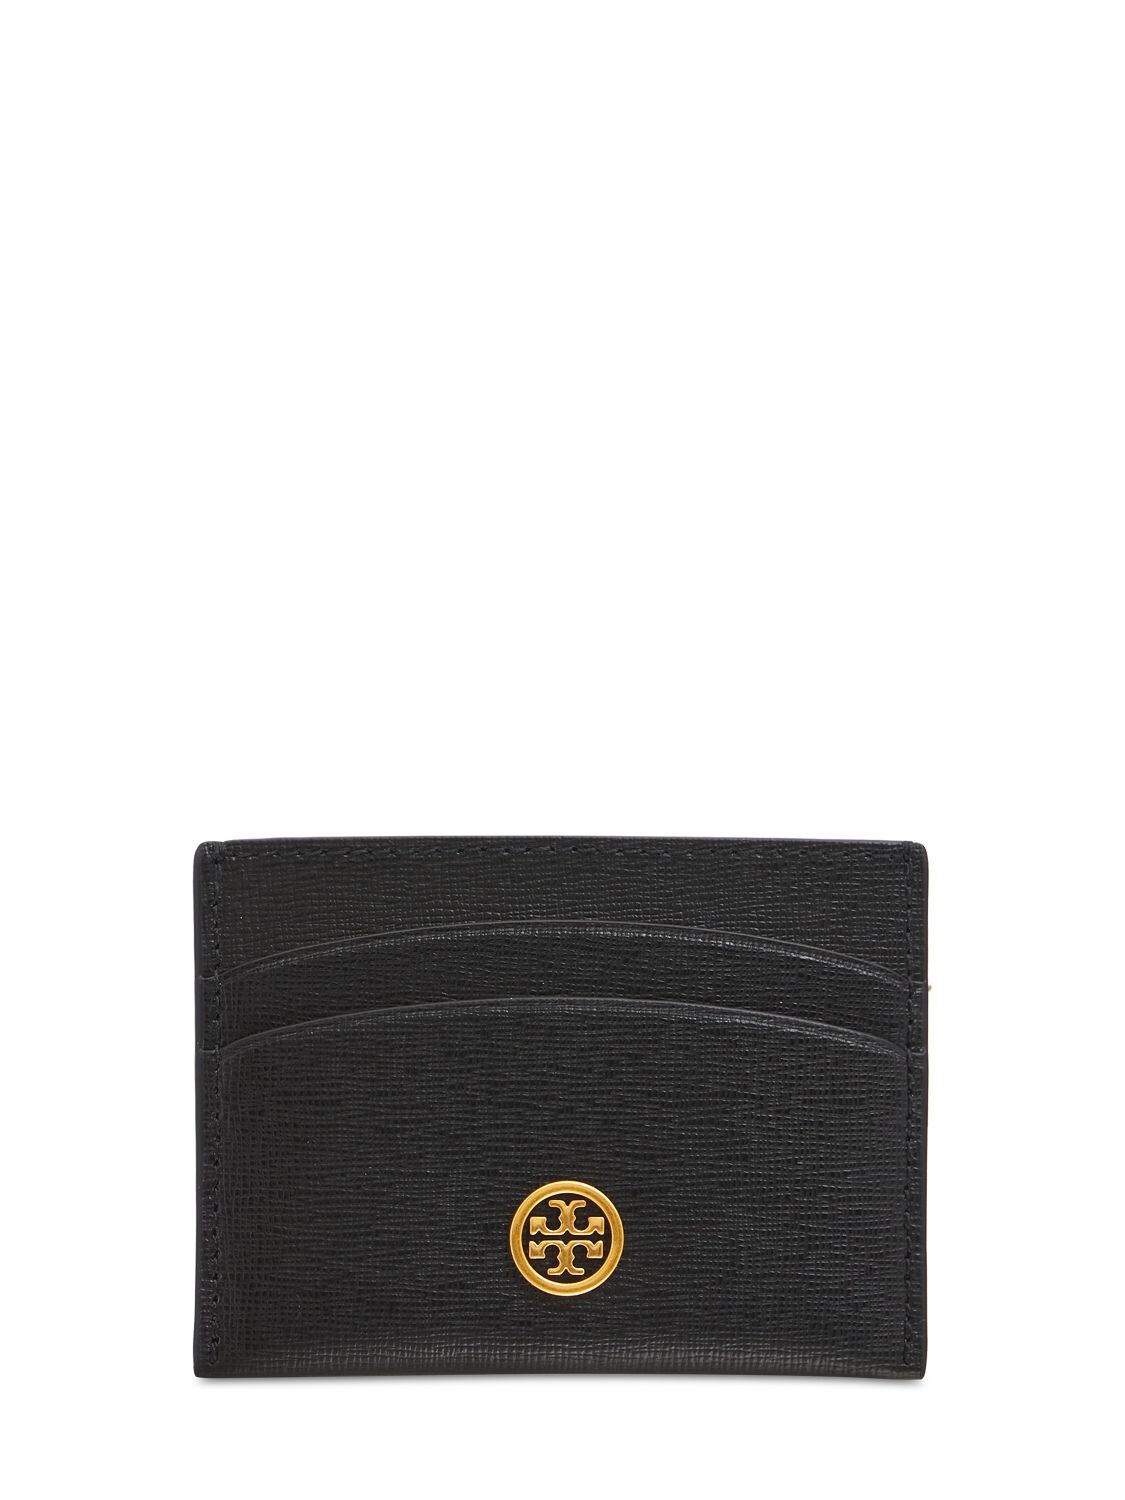 Tory Burch Robinson Leather Card Holder In Black